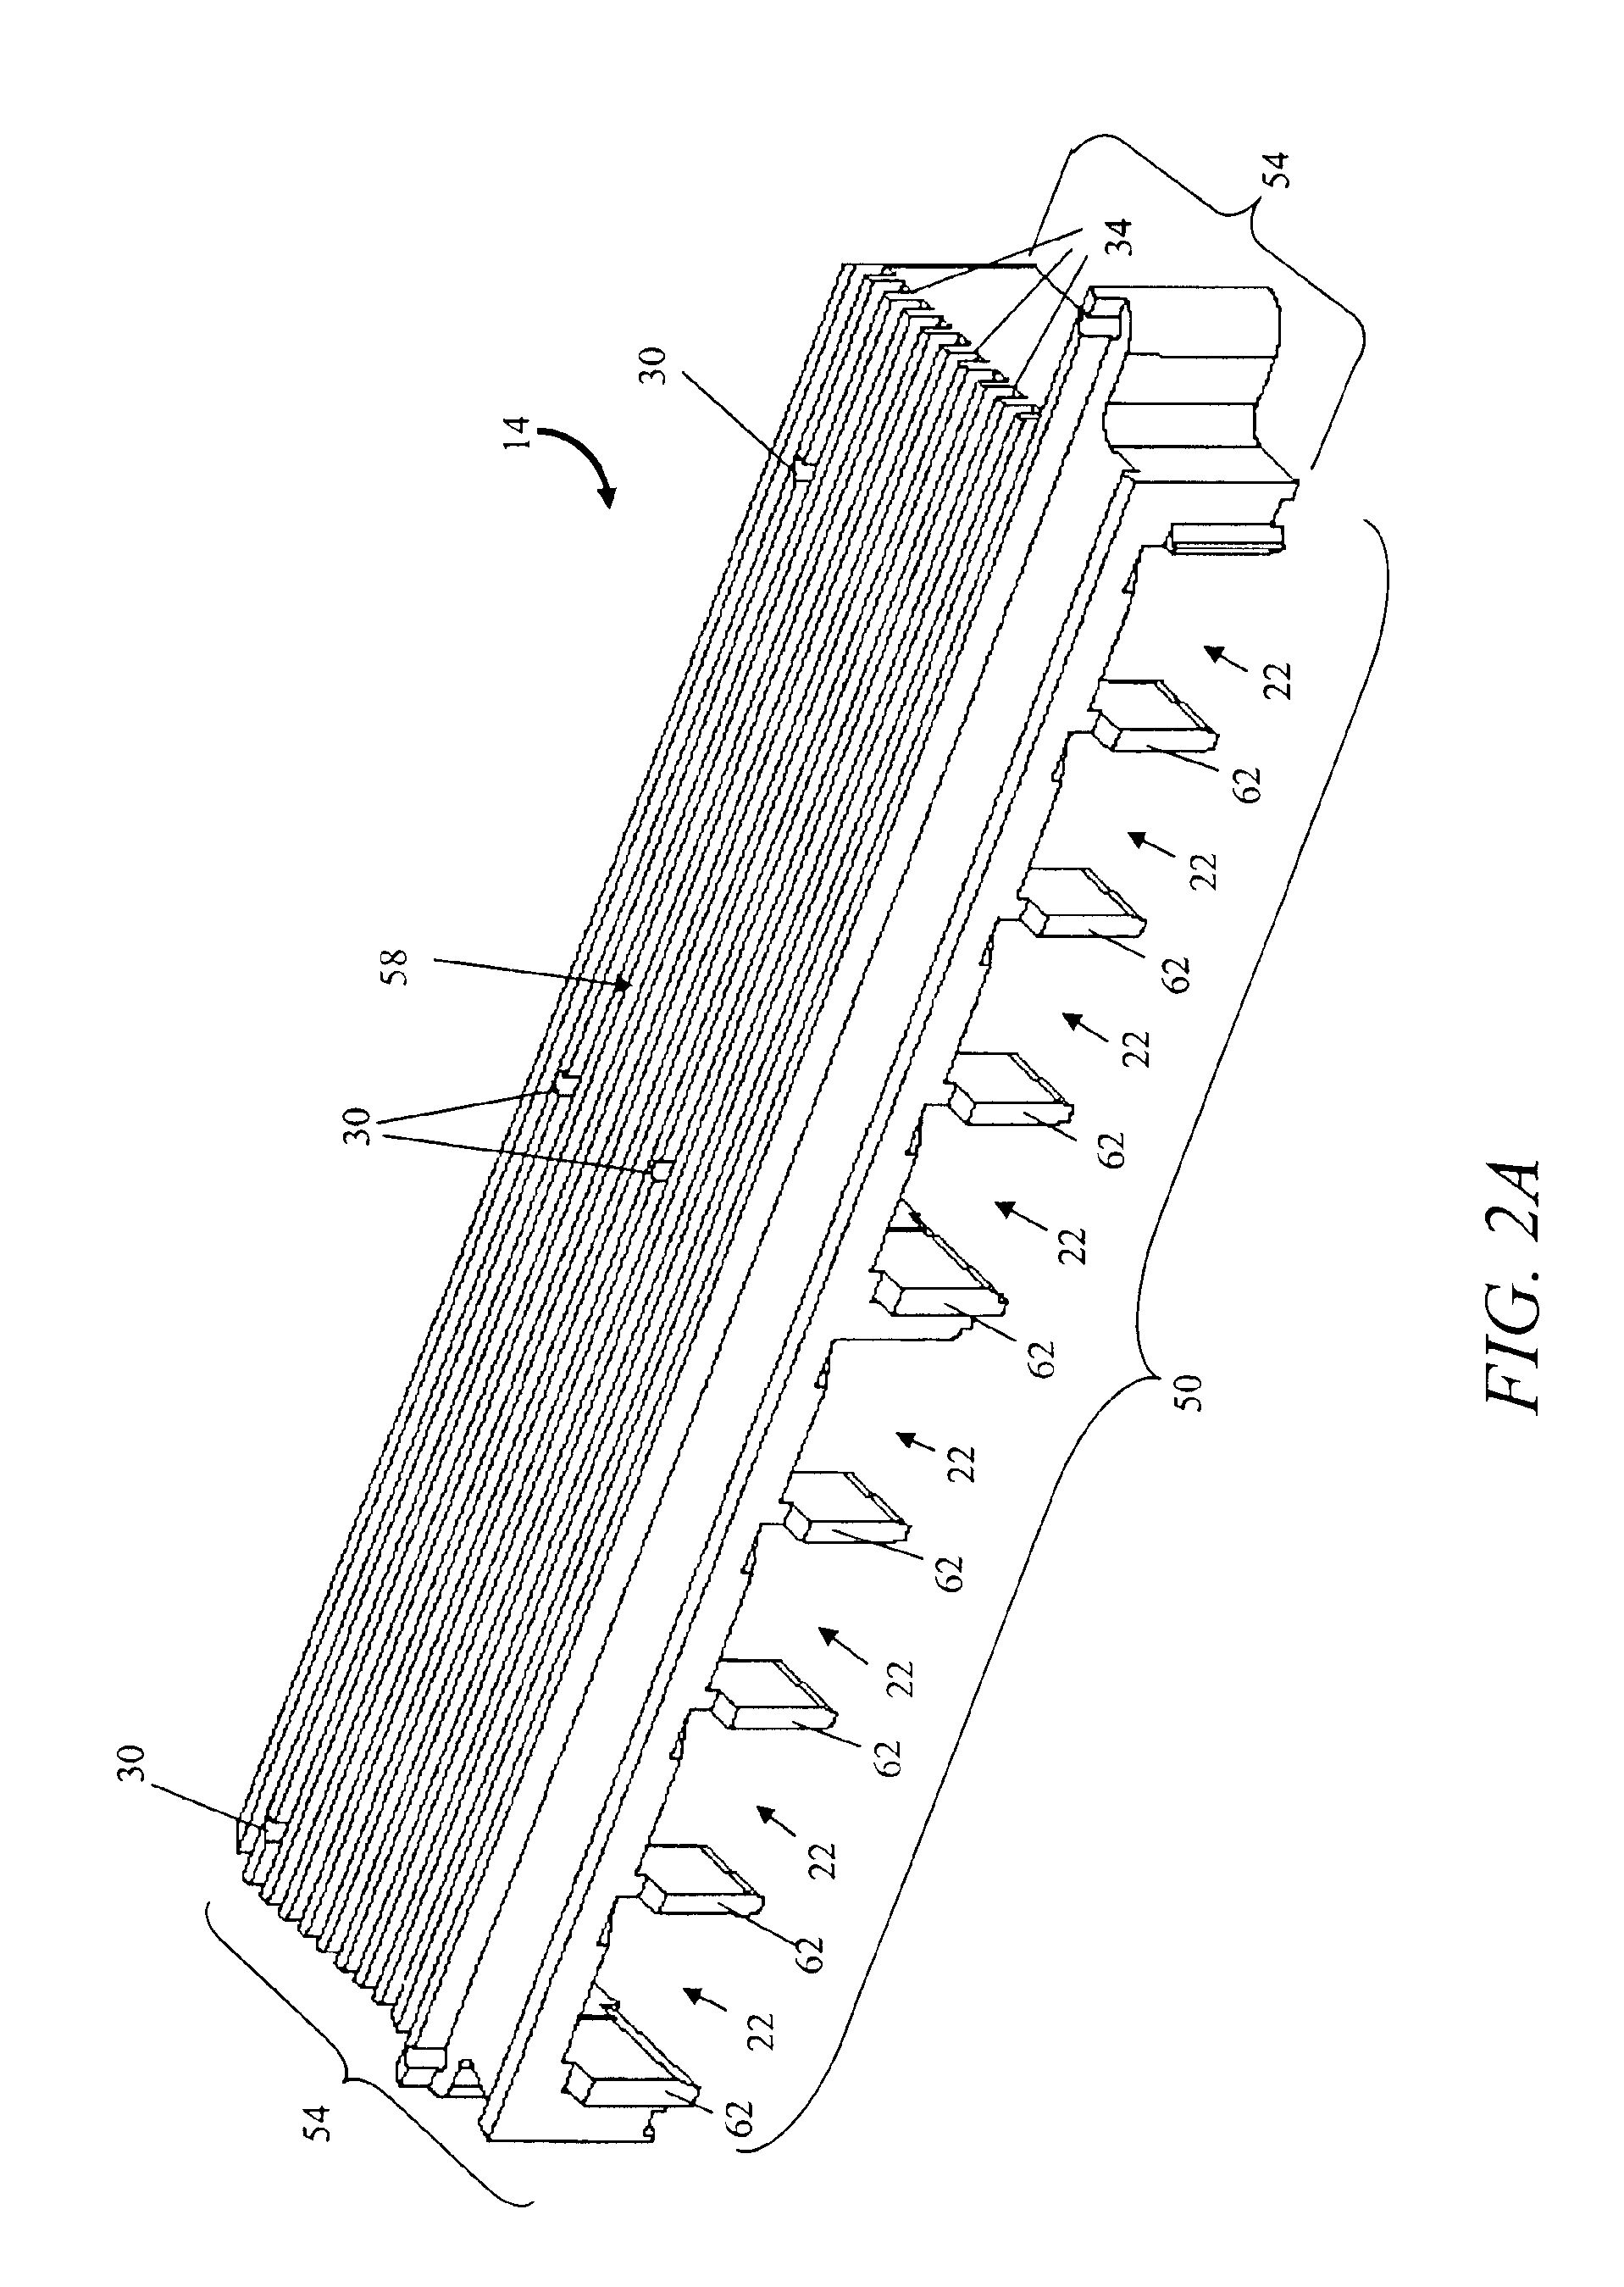 Electromagnetic compliant shield having electrostatic discharge protection